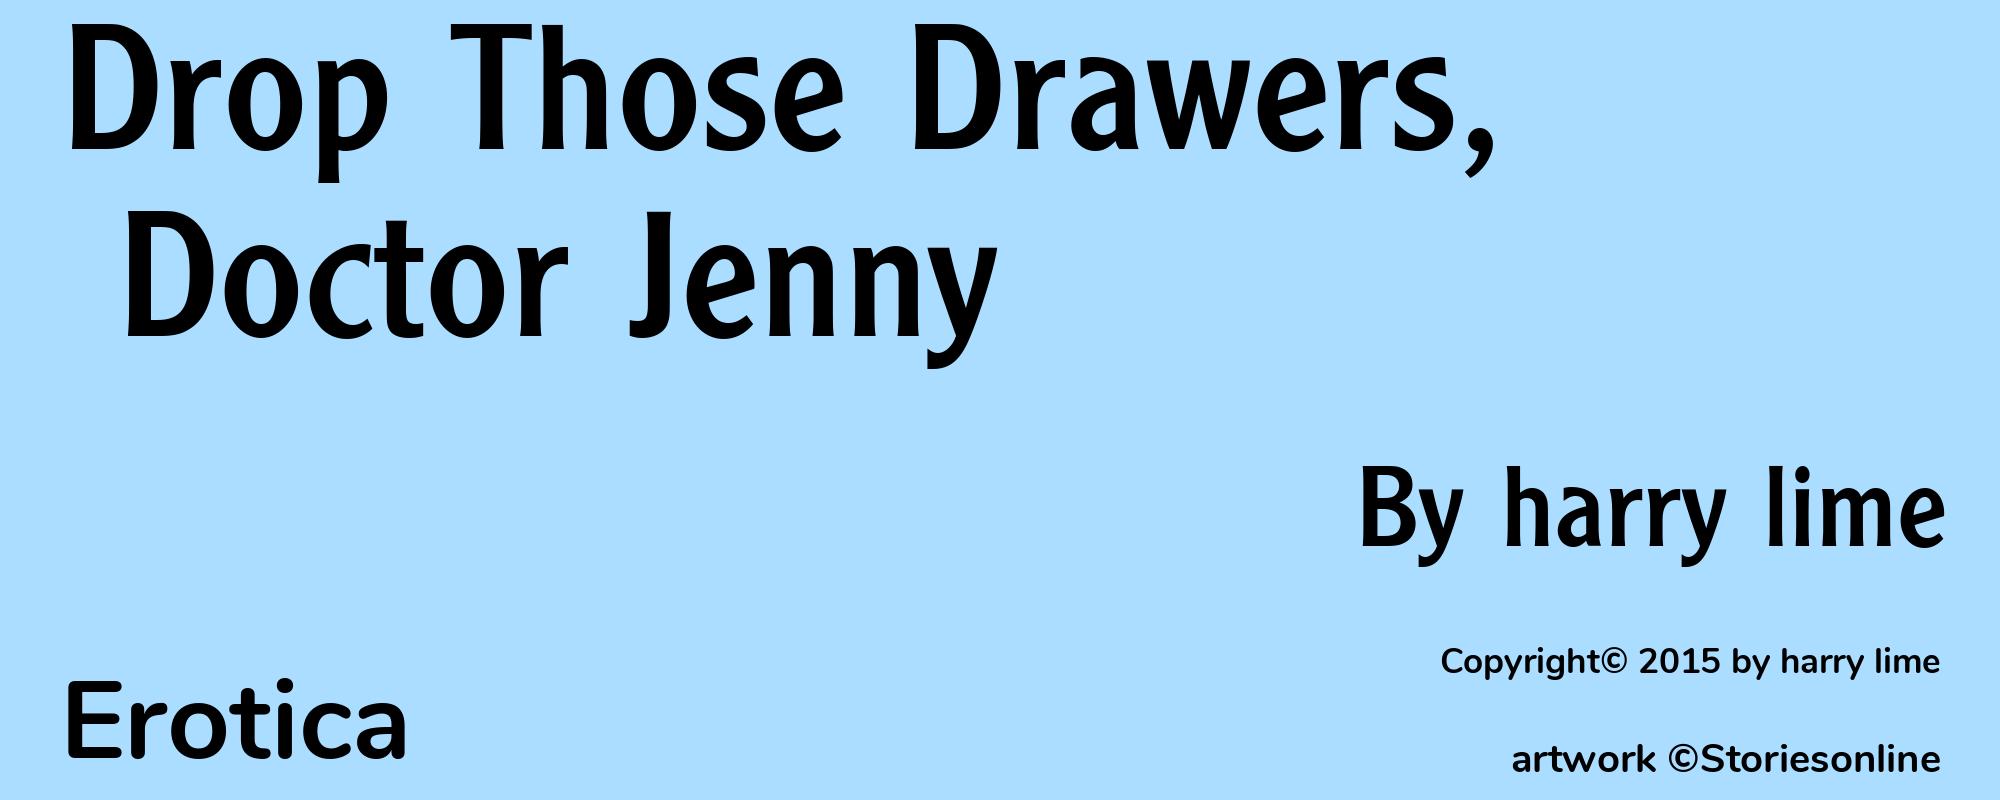 Drop Those Drawers, Doctor Jenny - Cover